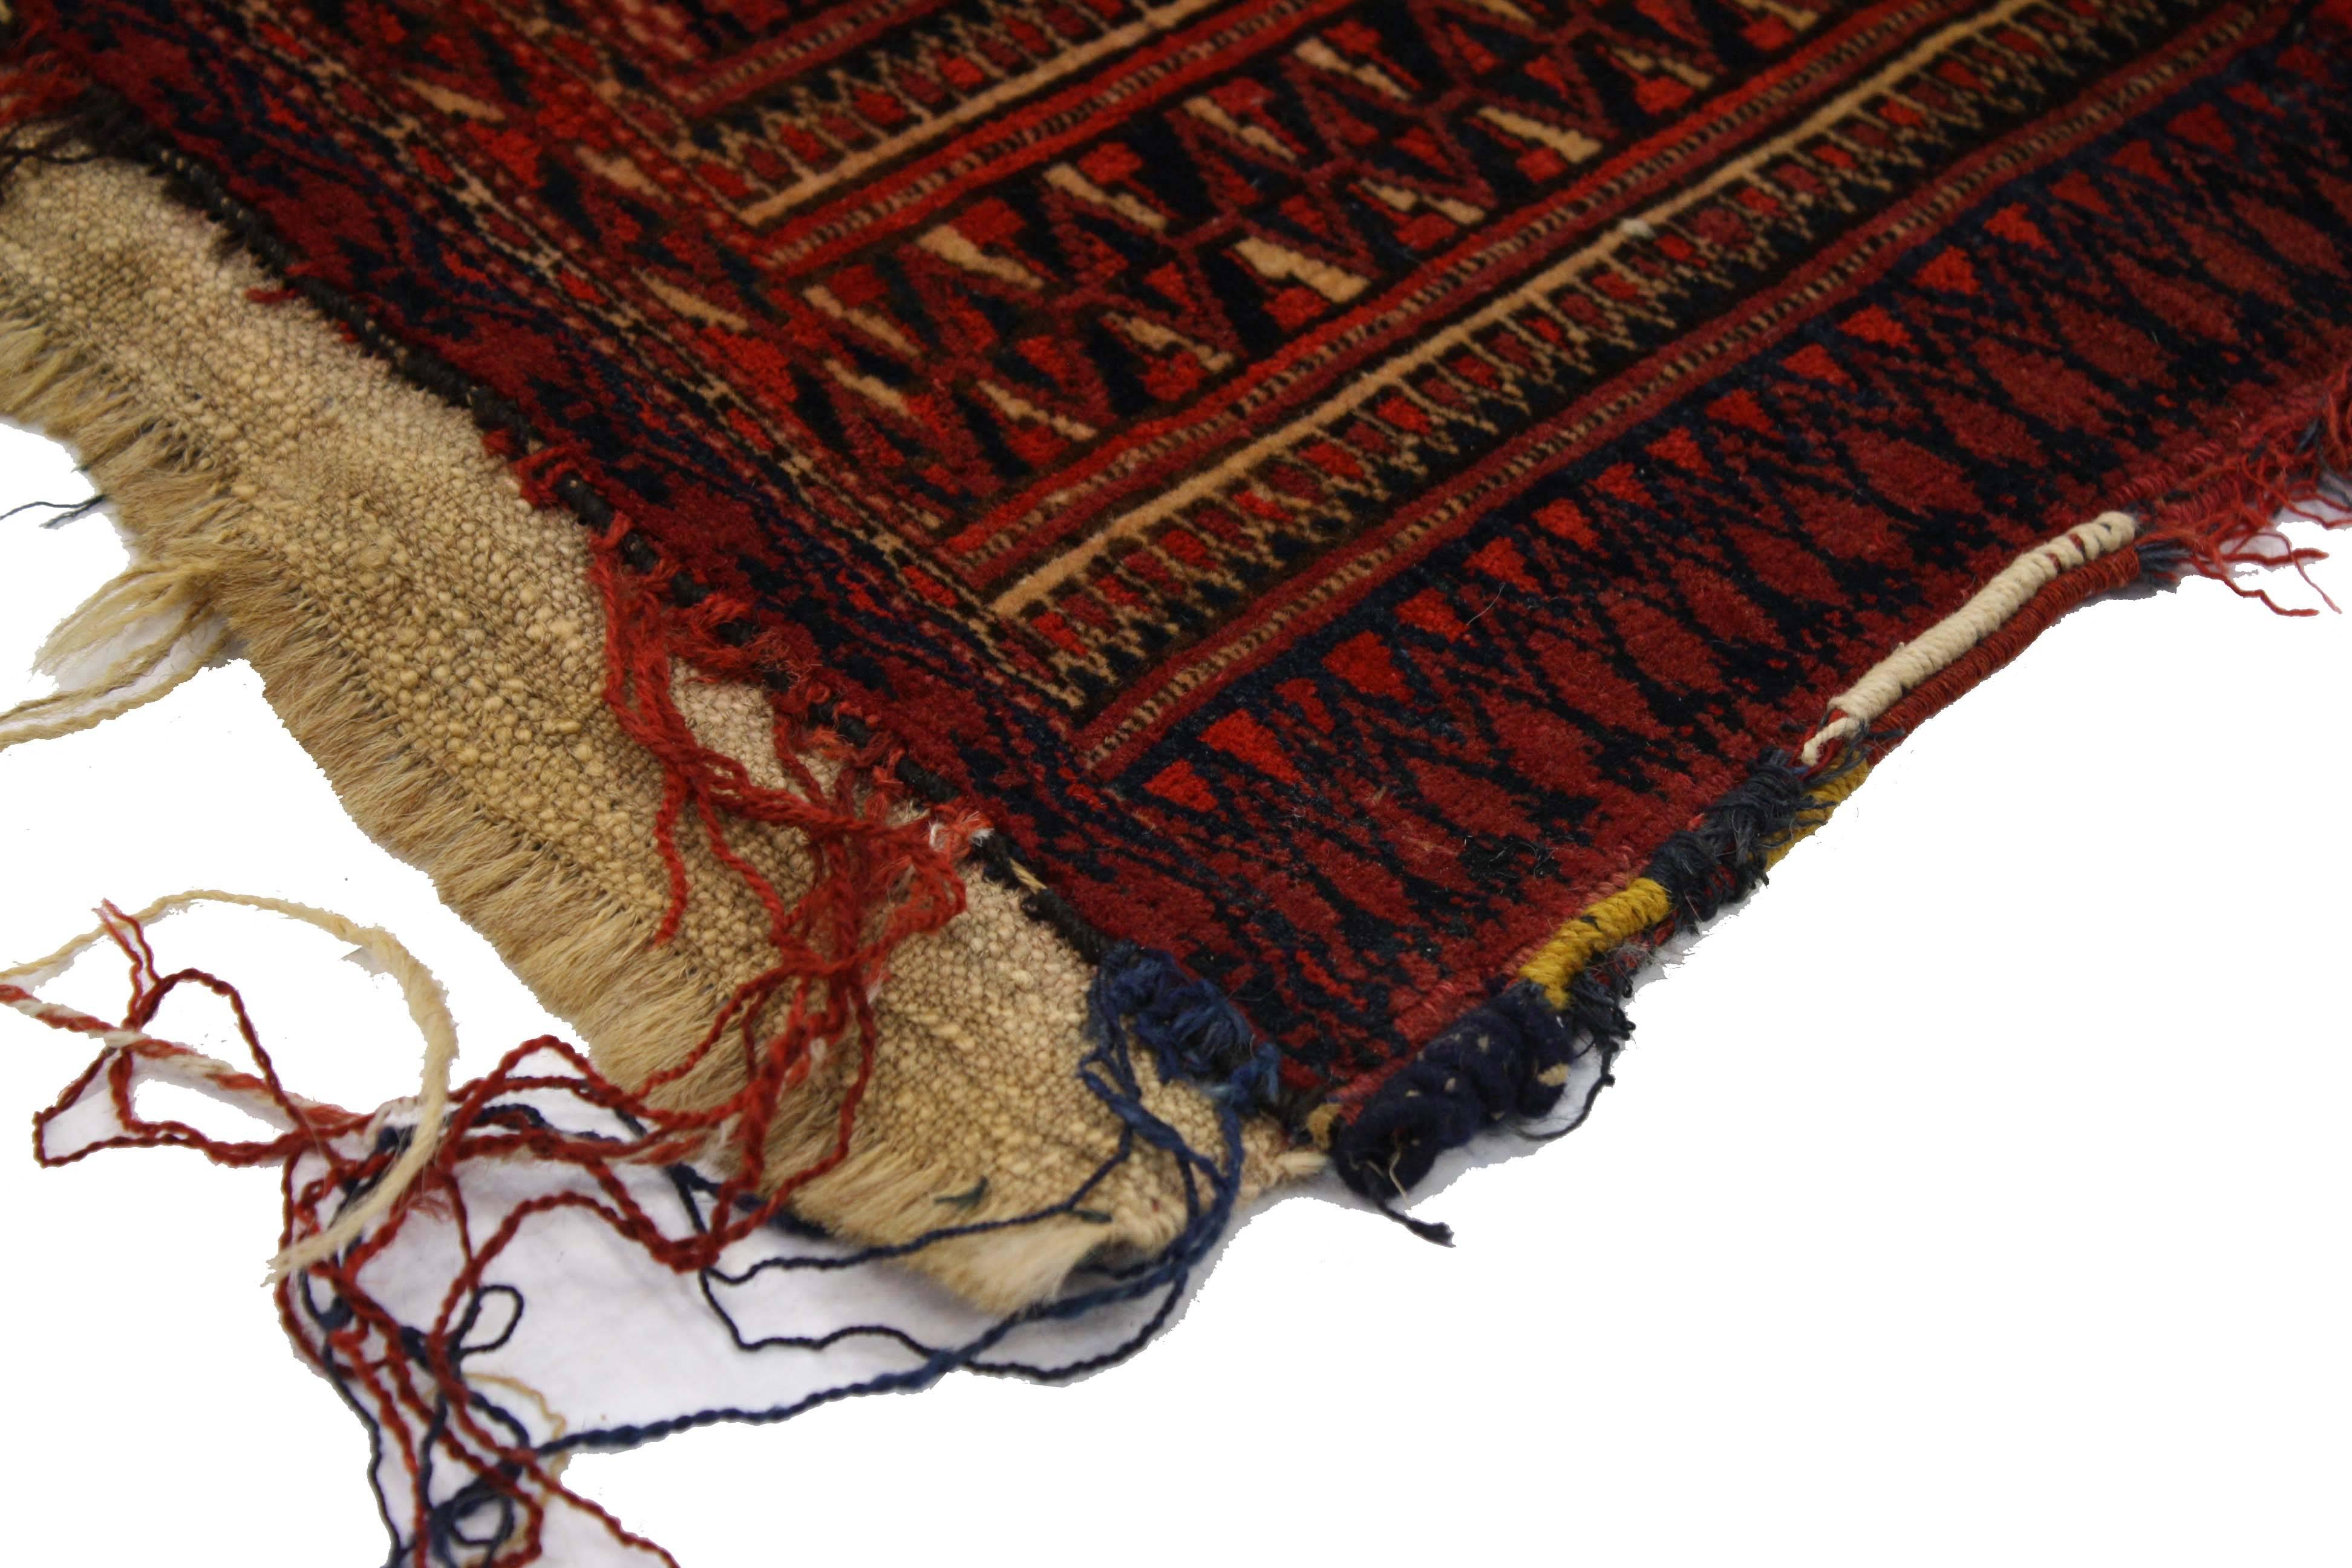 76639 Antique Afghan Turkoman Turkmen Torba bag, wall hanging, tribal textile tapestry. This hand knotted wool antique Afghan Turkmen Turkoman Torba storage bag features an all-over symmetrical geometric pattern of Gul motifs, possibly Tekke, Ersari